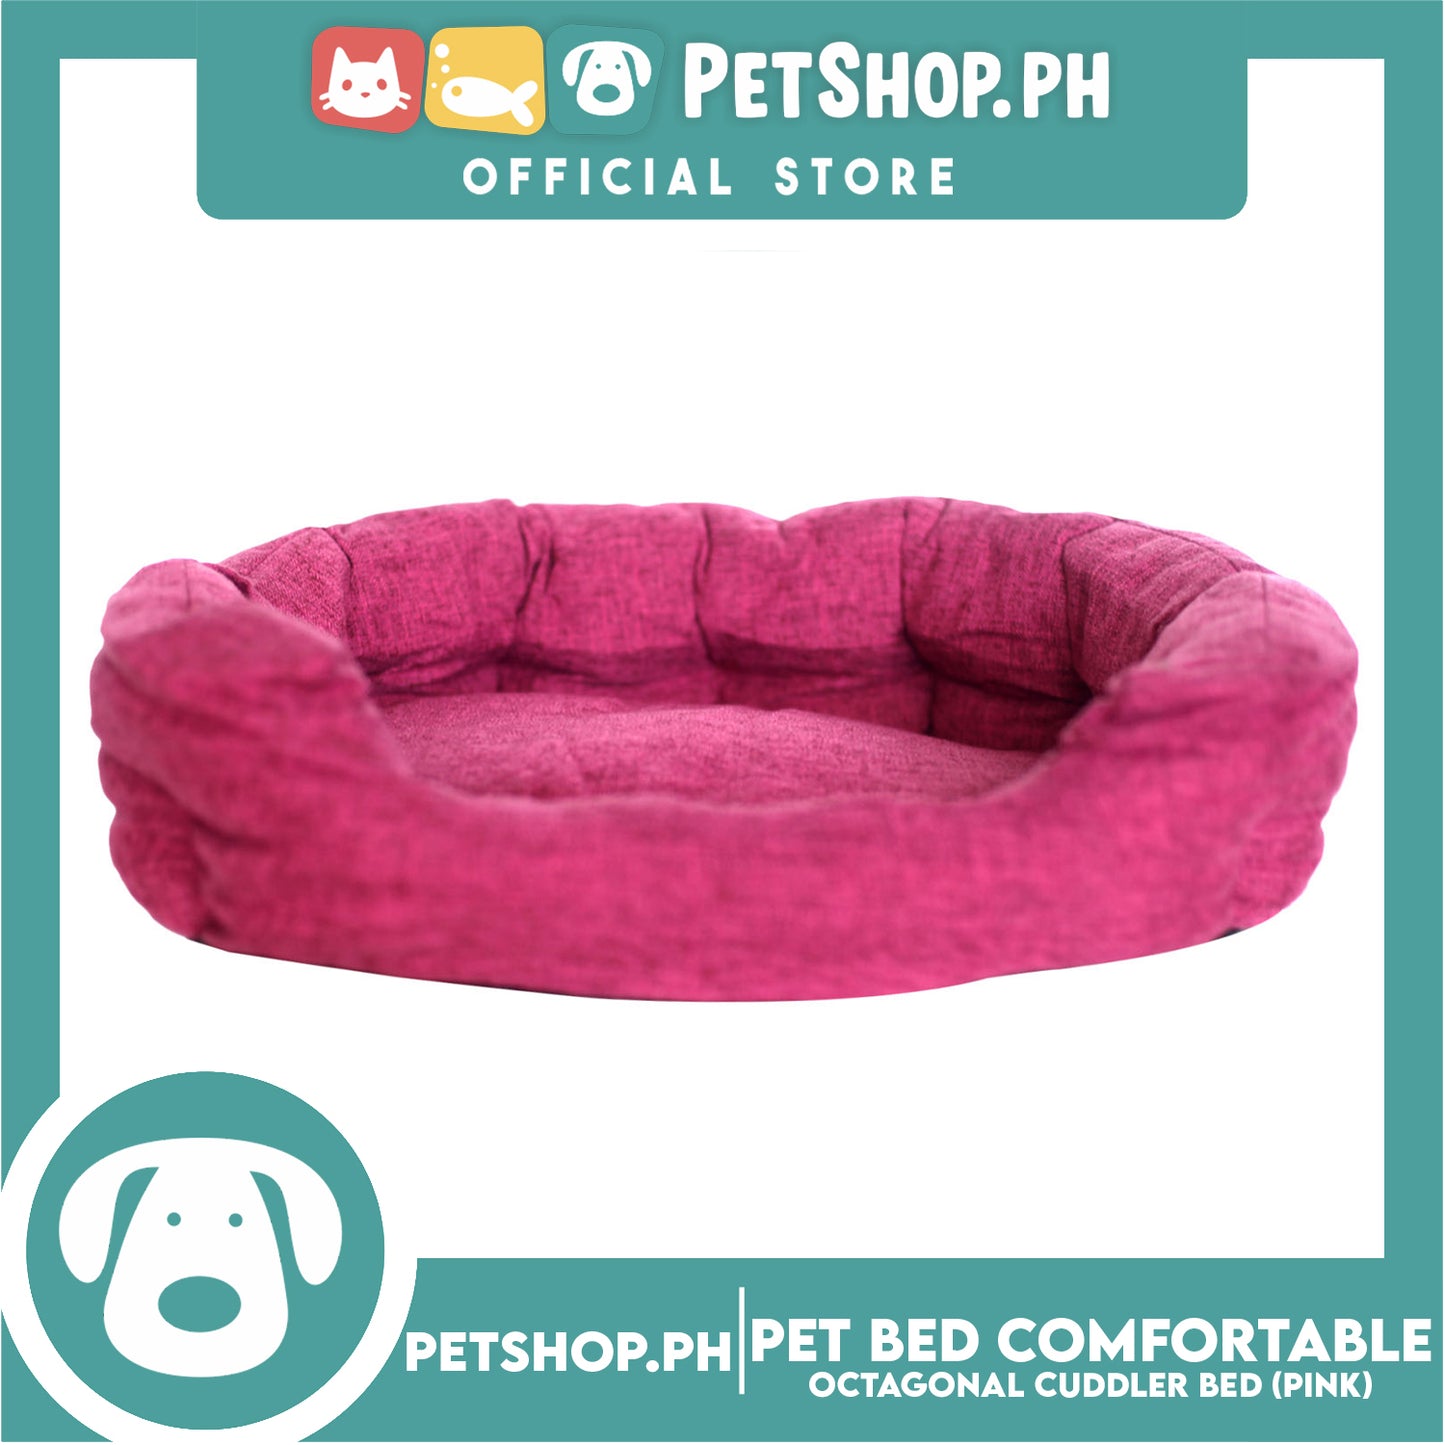 Pet Bed Comfortable Octagonal Cuddler Dog Bed 42x35x13cm Small for Dogs & Cats (Pink)